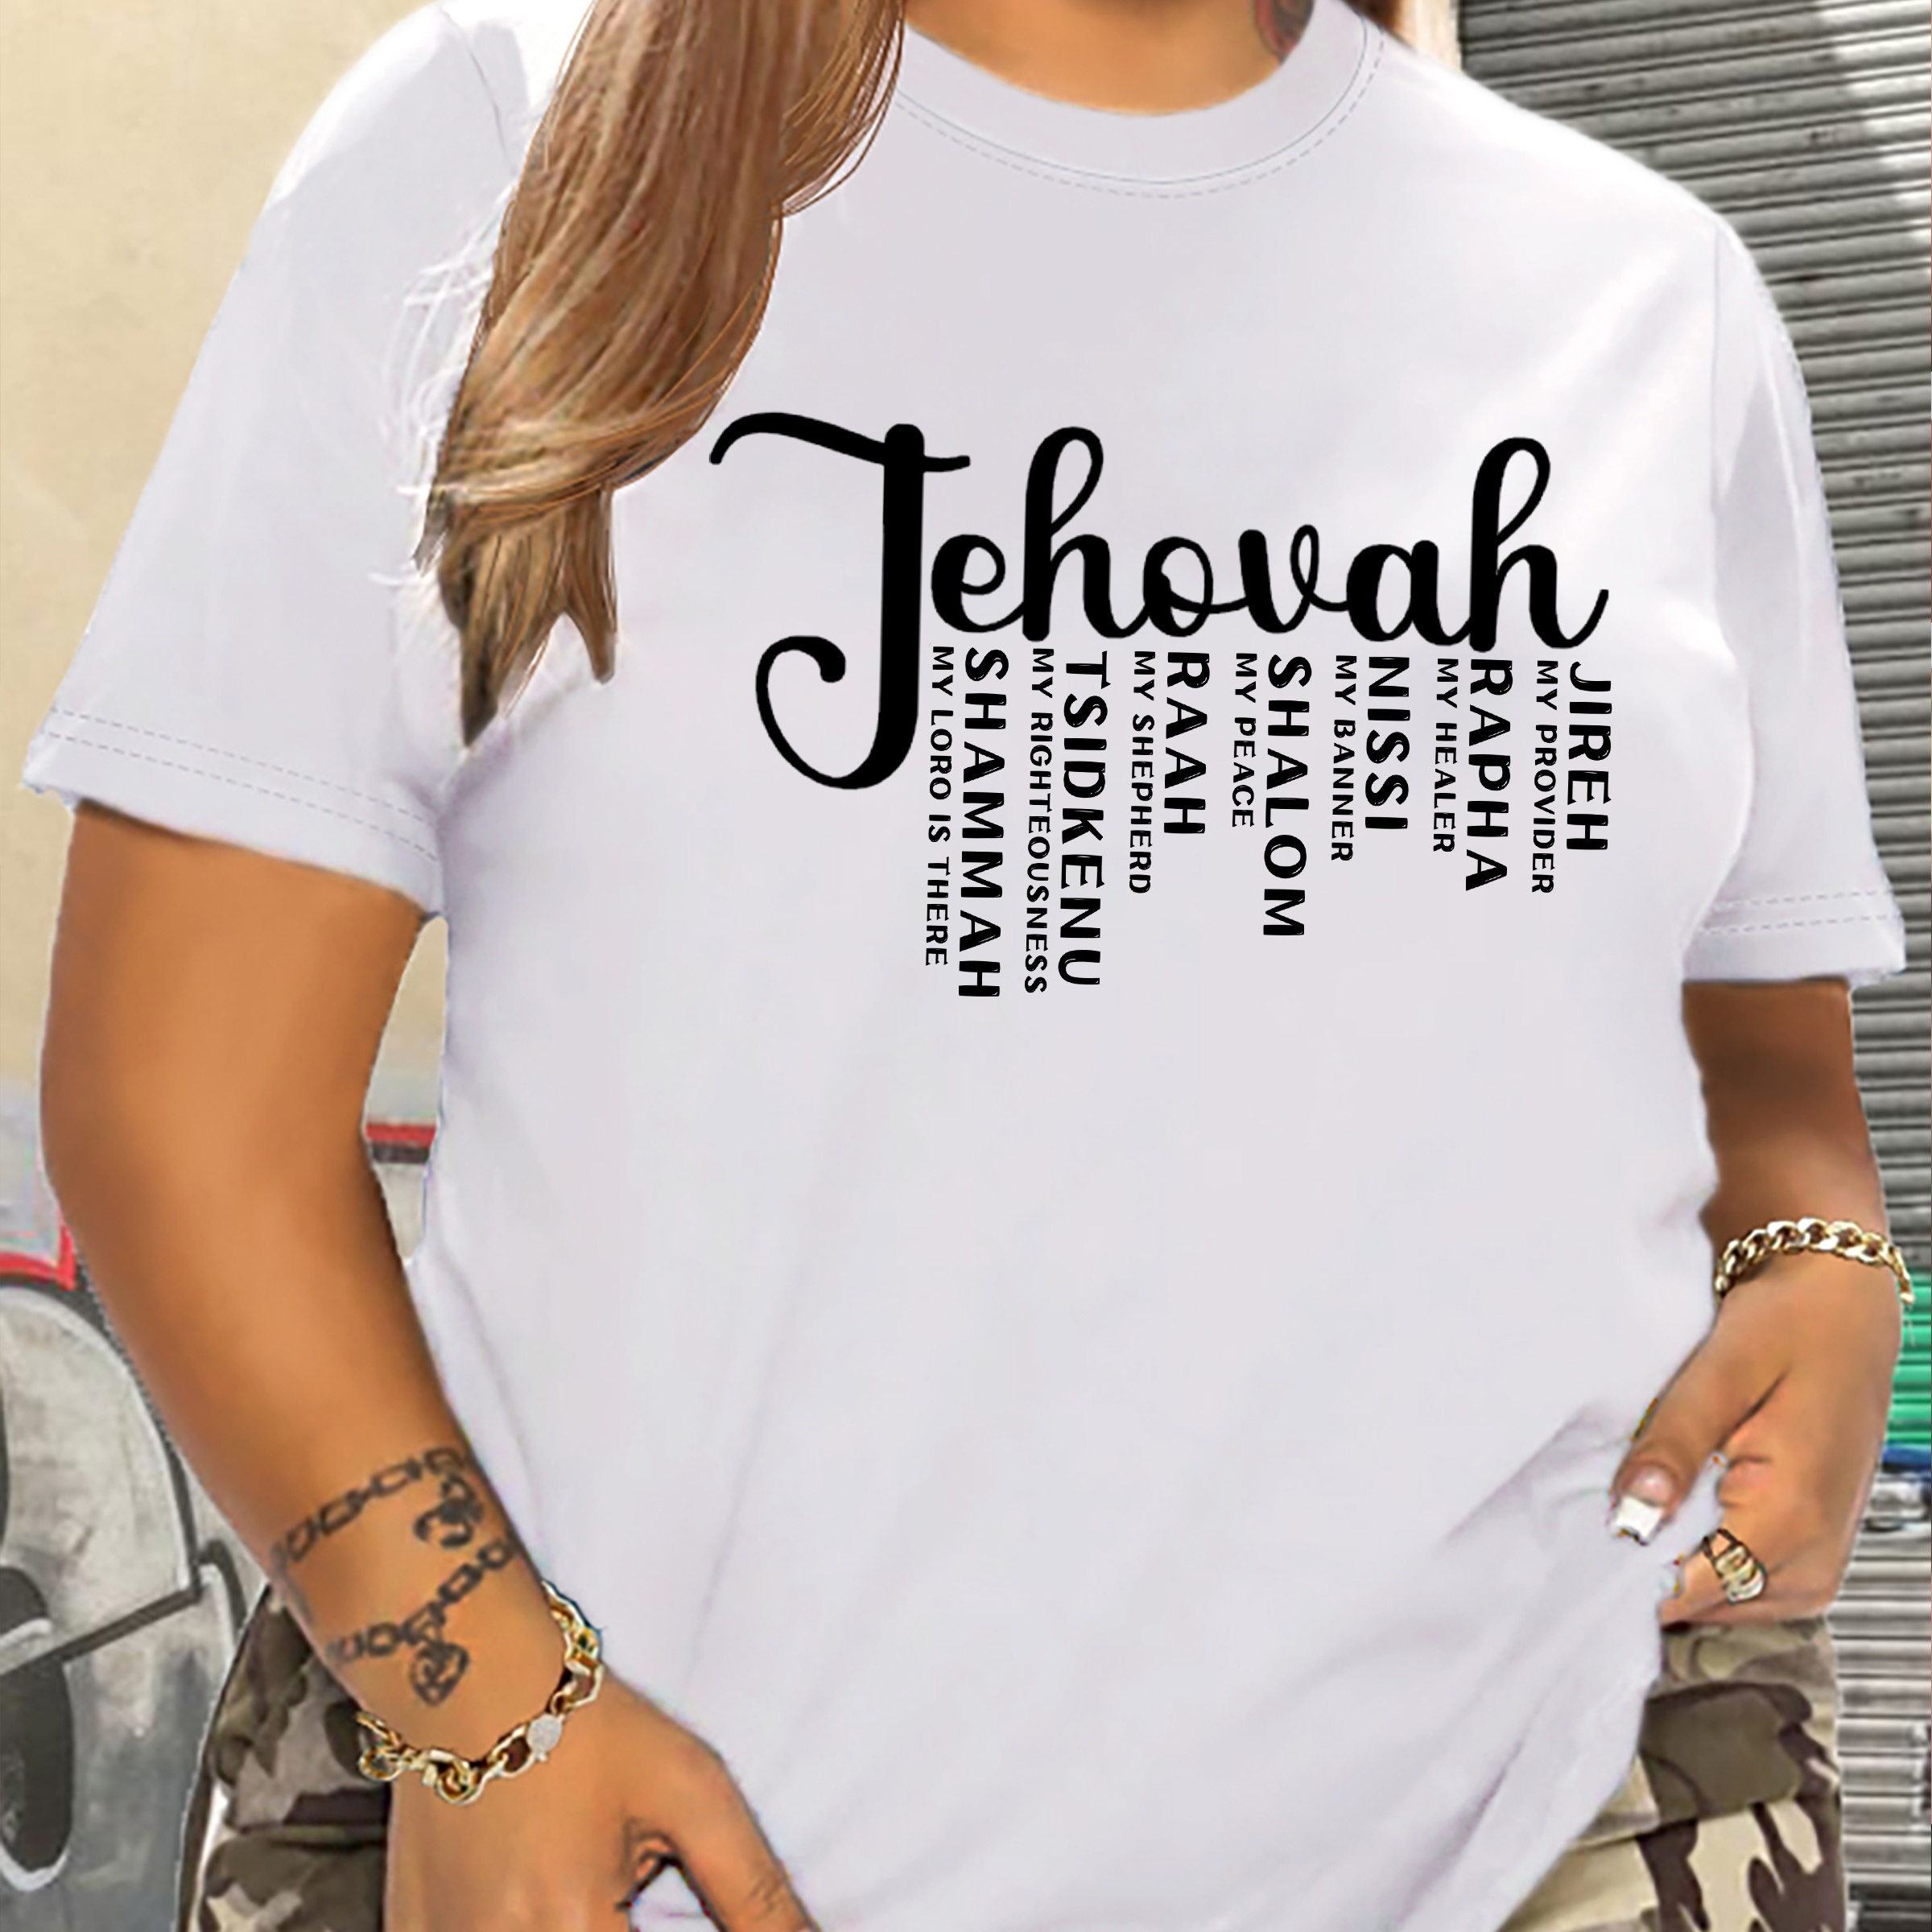 

Women's Plus Size Casual Sporty T-shirt With "jehovah" Letter Print, Fashionable Short Sleeve Tee For Ladies, Comfort Fit Top – White